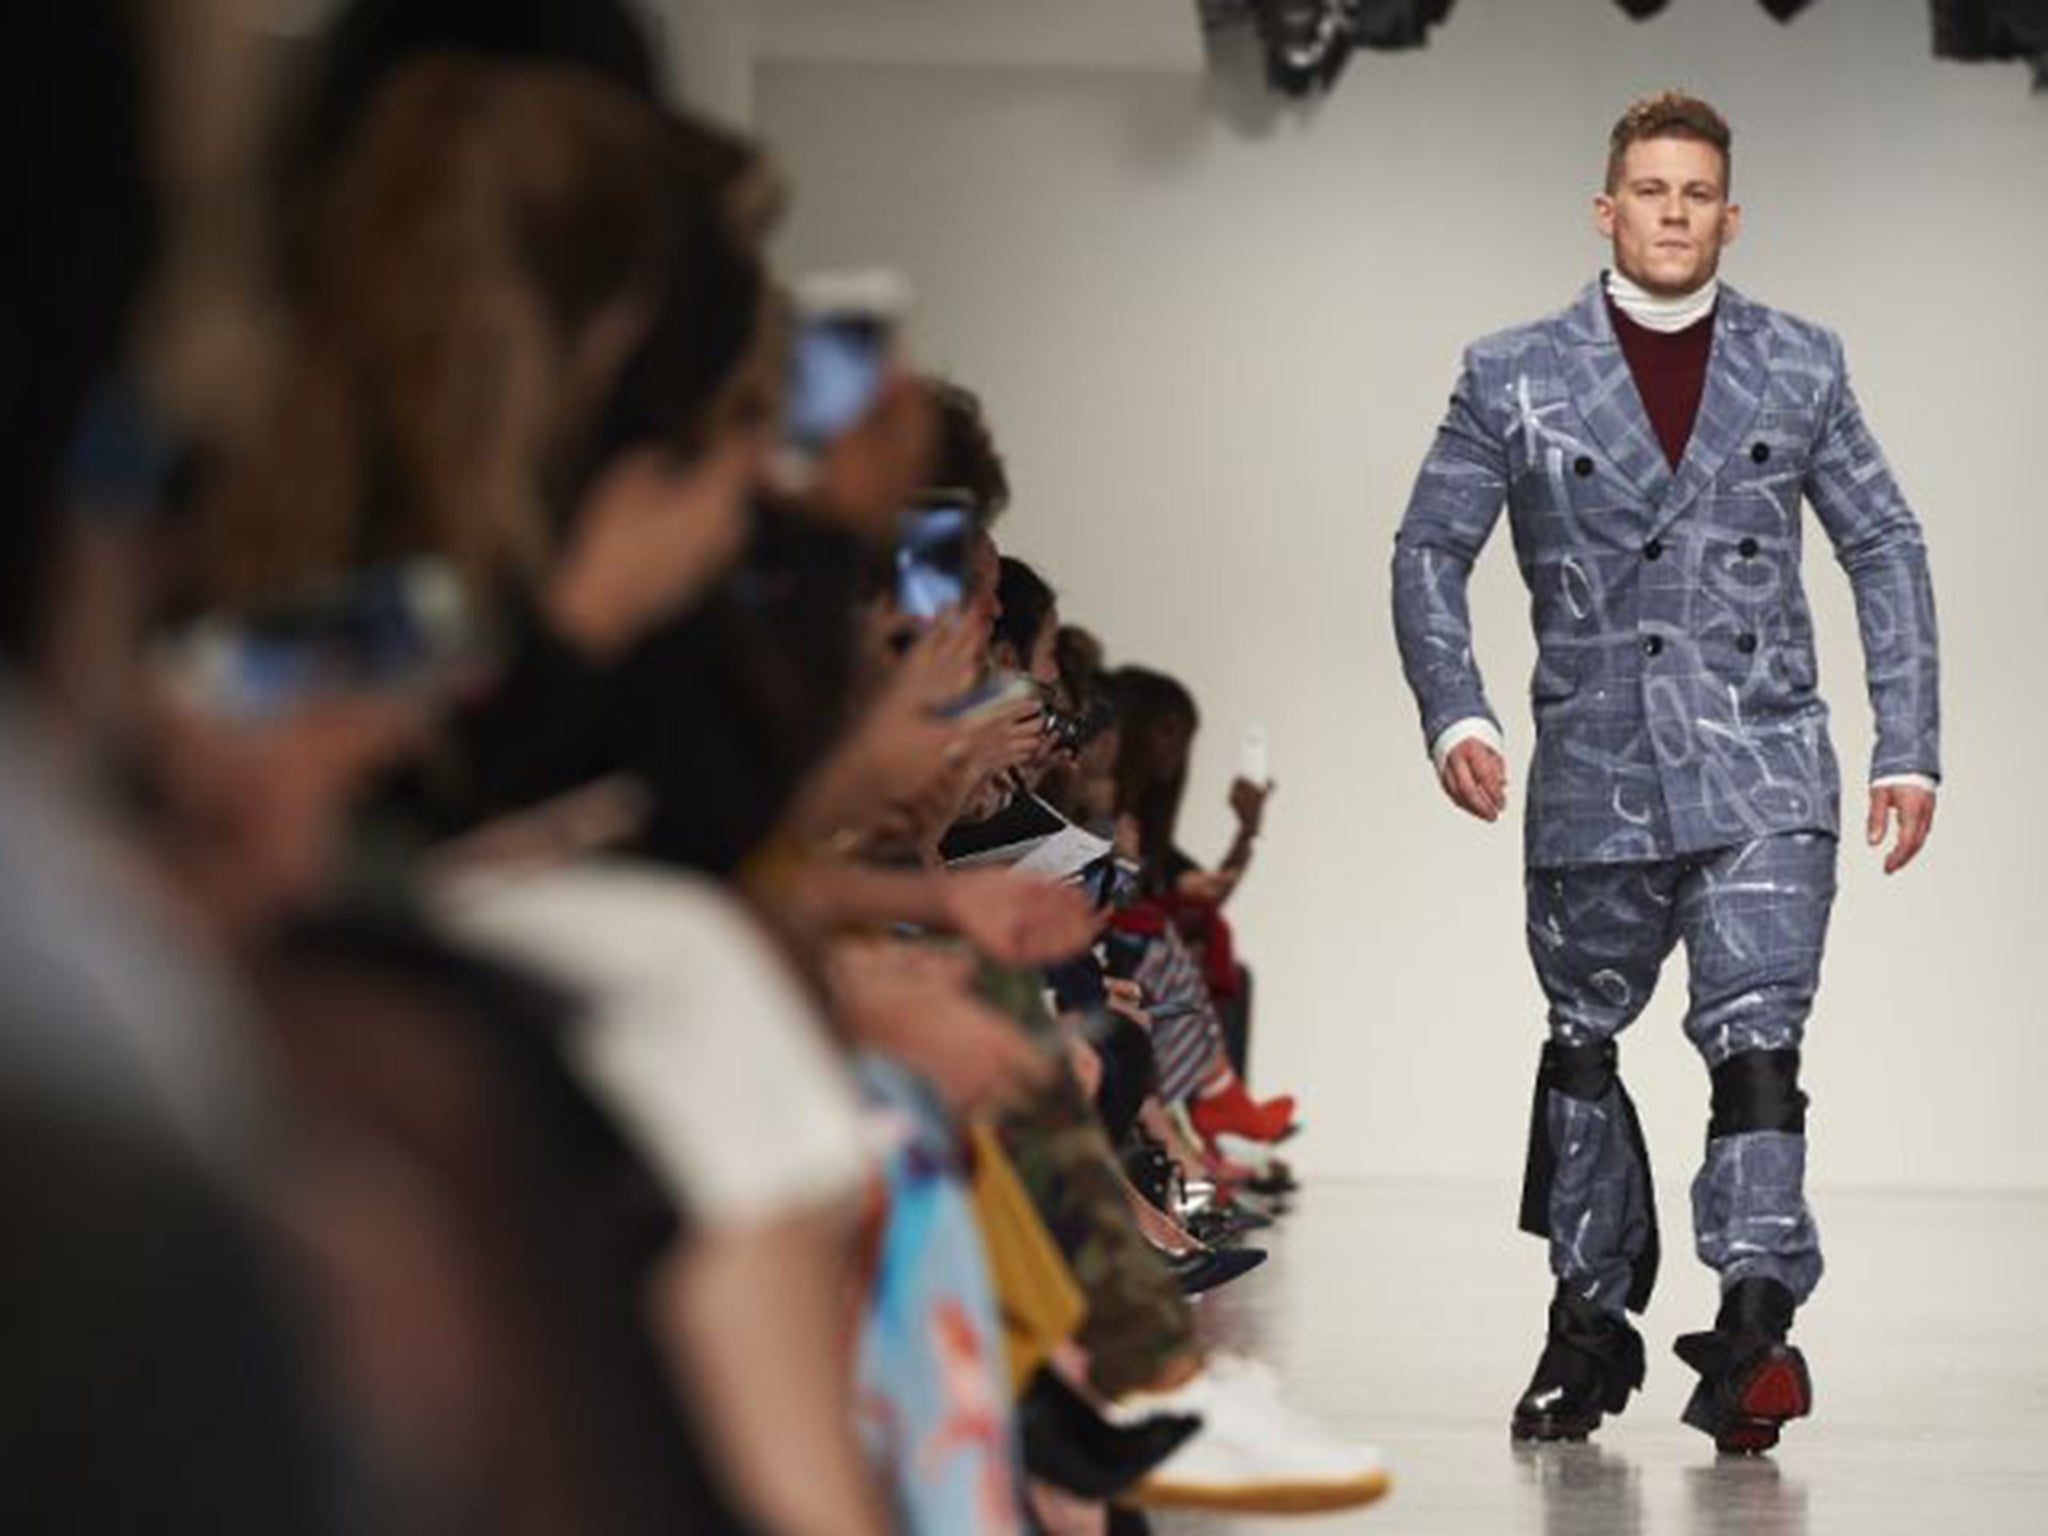 Model Jack Ayers, who uses a prosthetic limb, on the catwalk for Teatum Jones in London